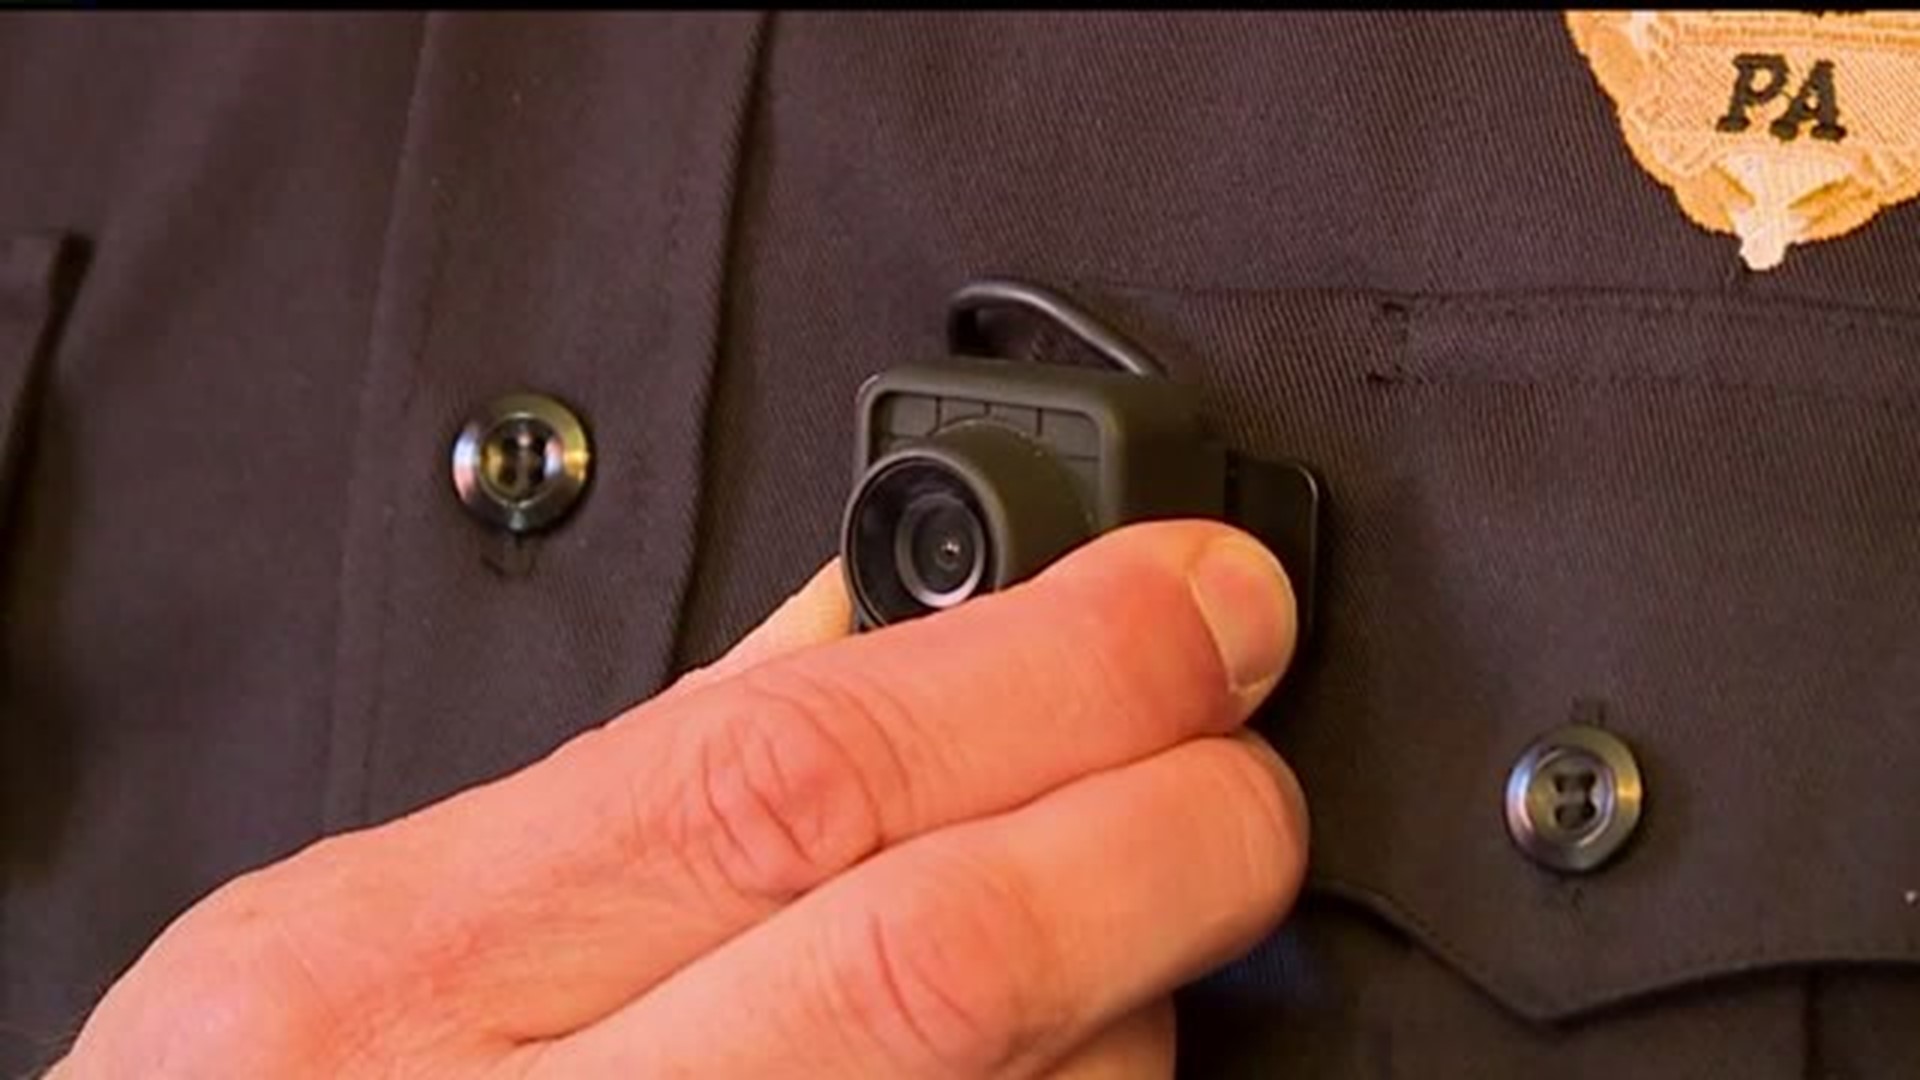 Study finds majority of Pennsylvanians want police to wear body cameras